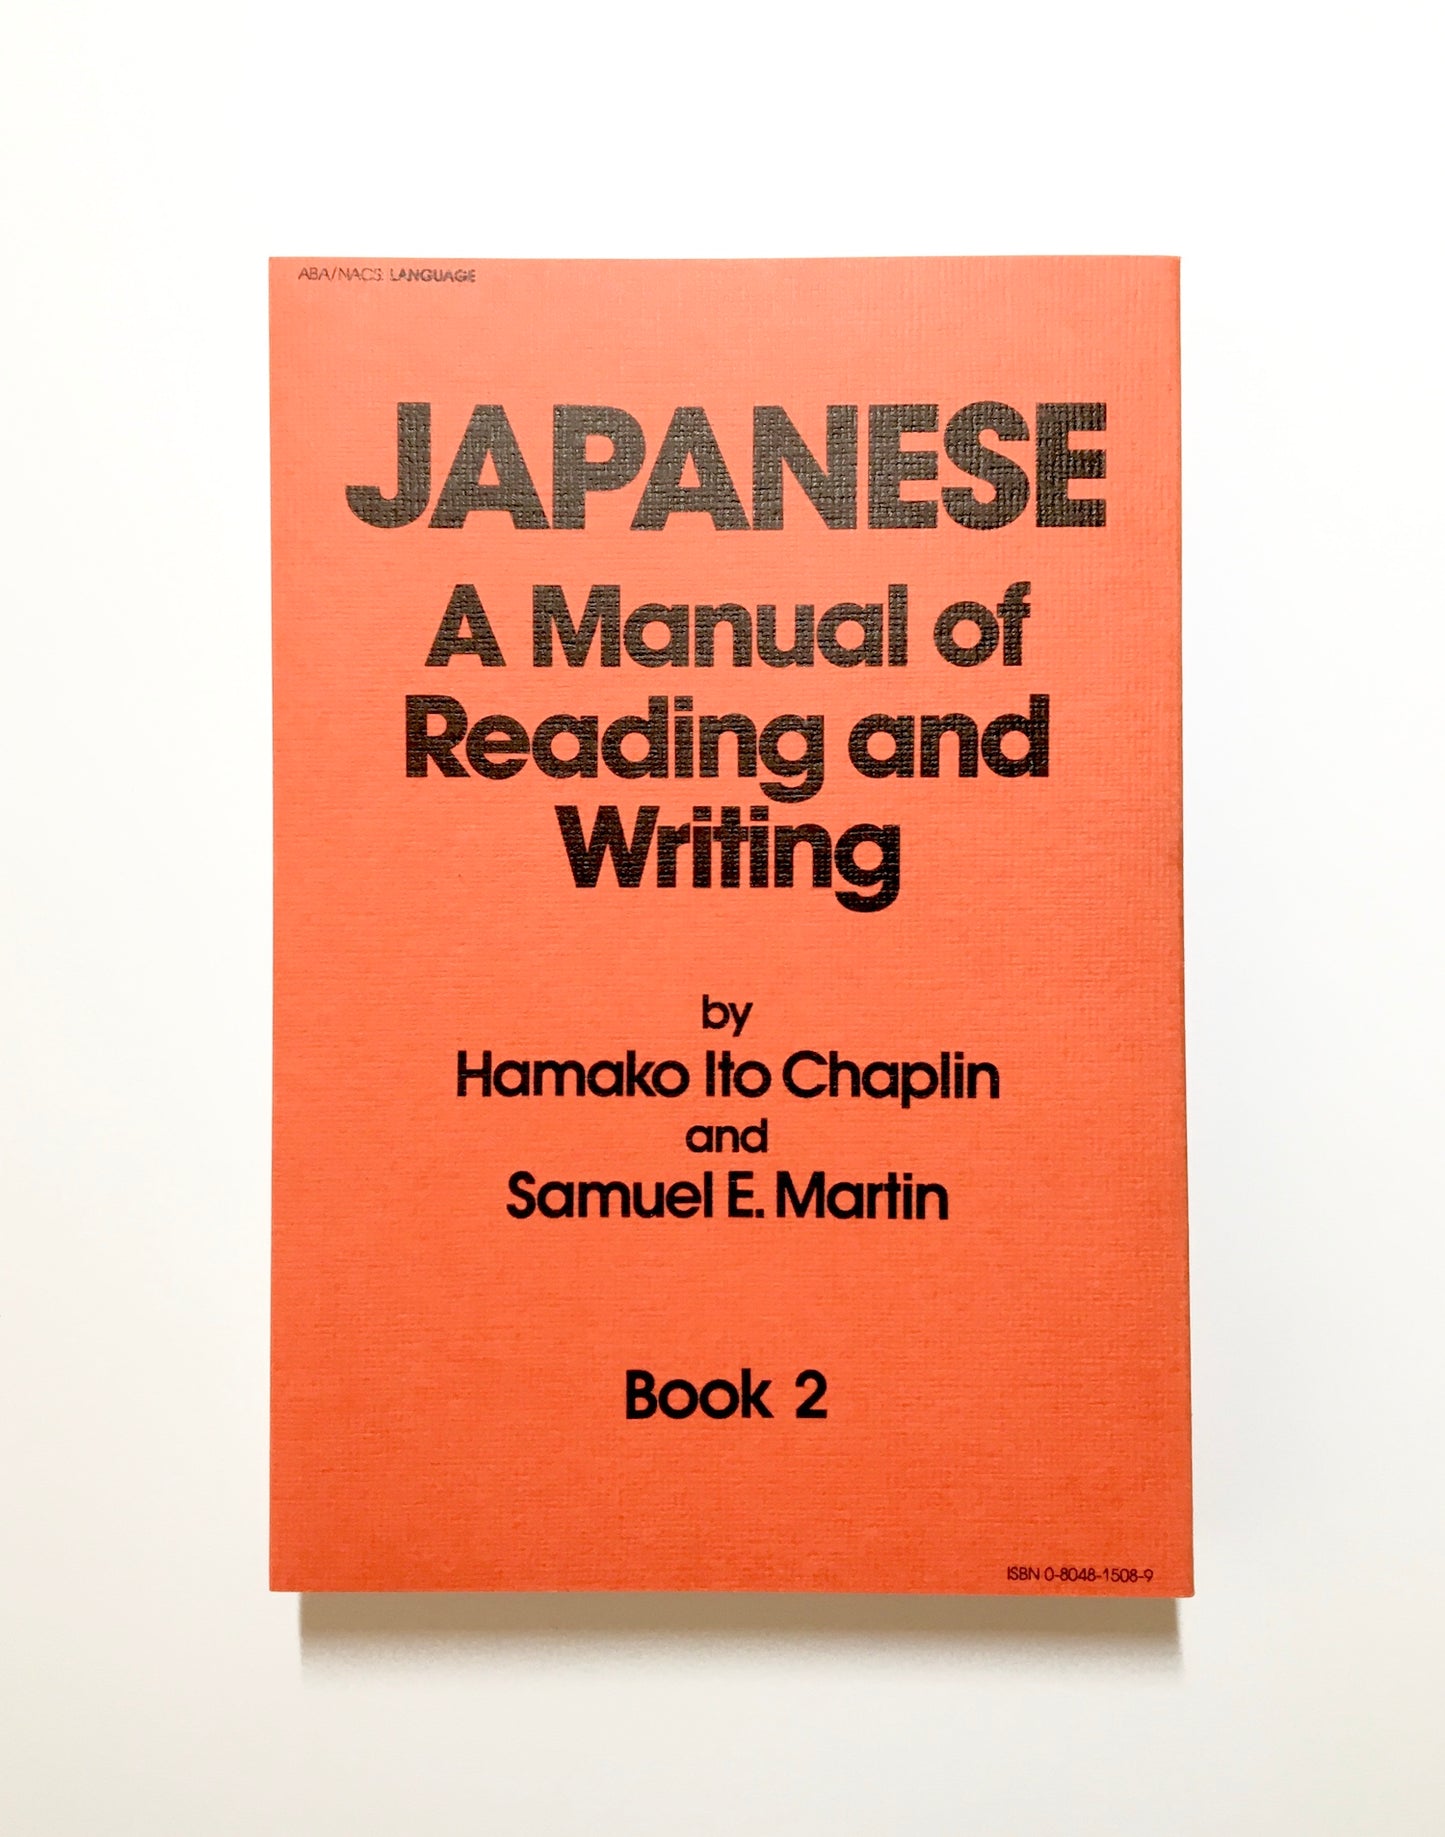 Japanese: A Manual of Reading and Writing